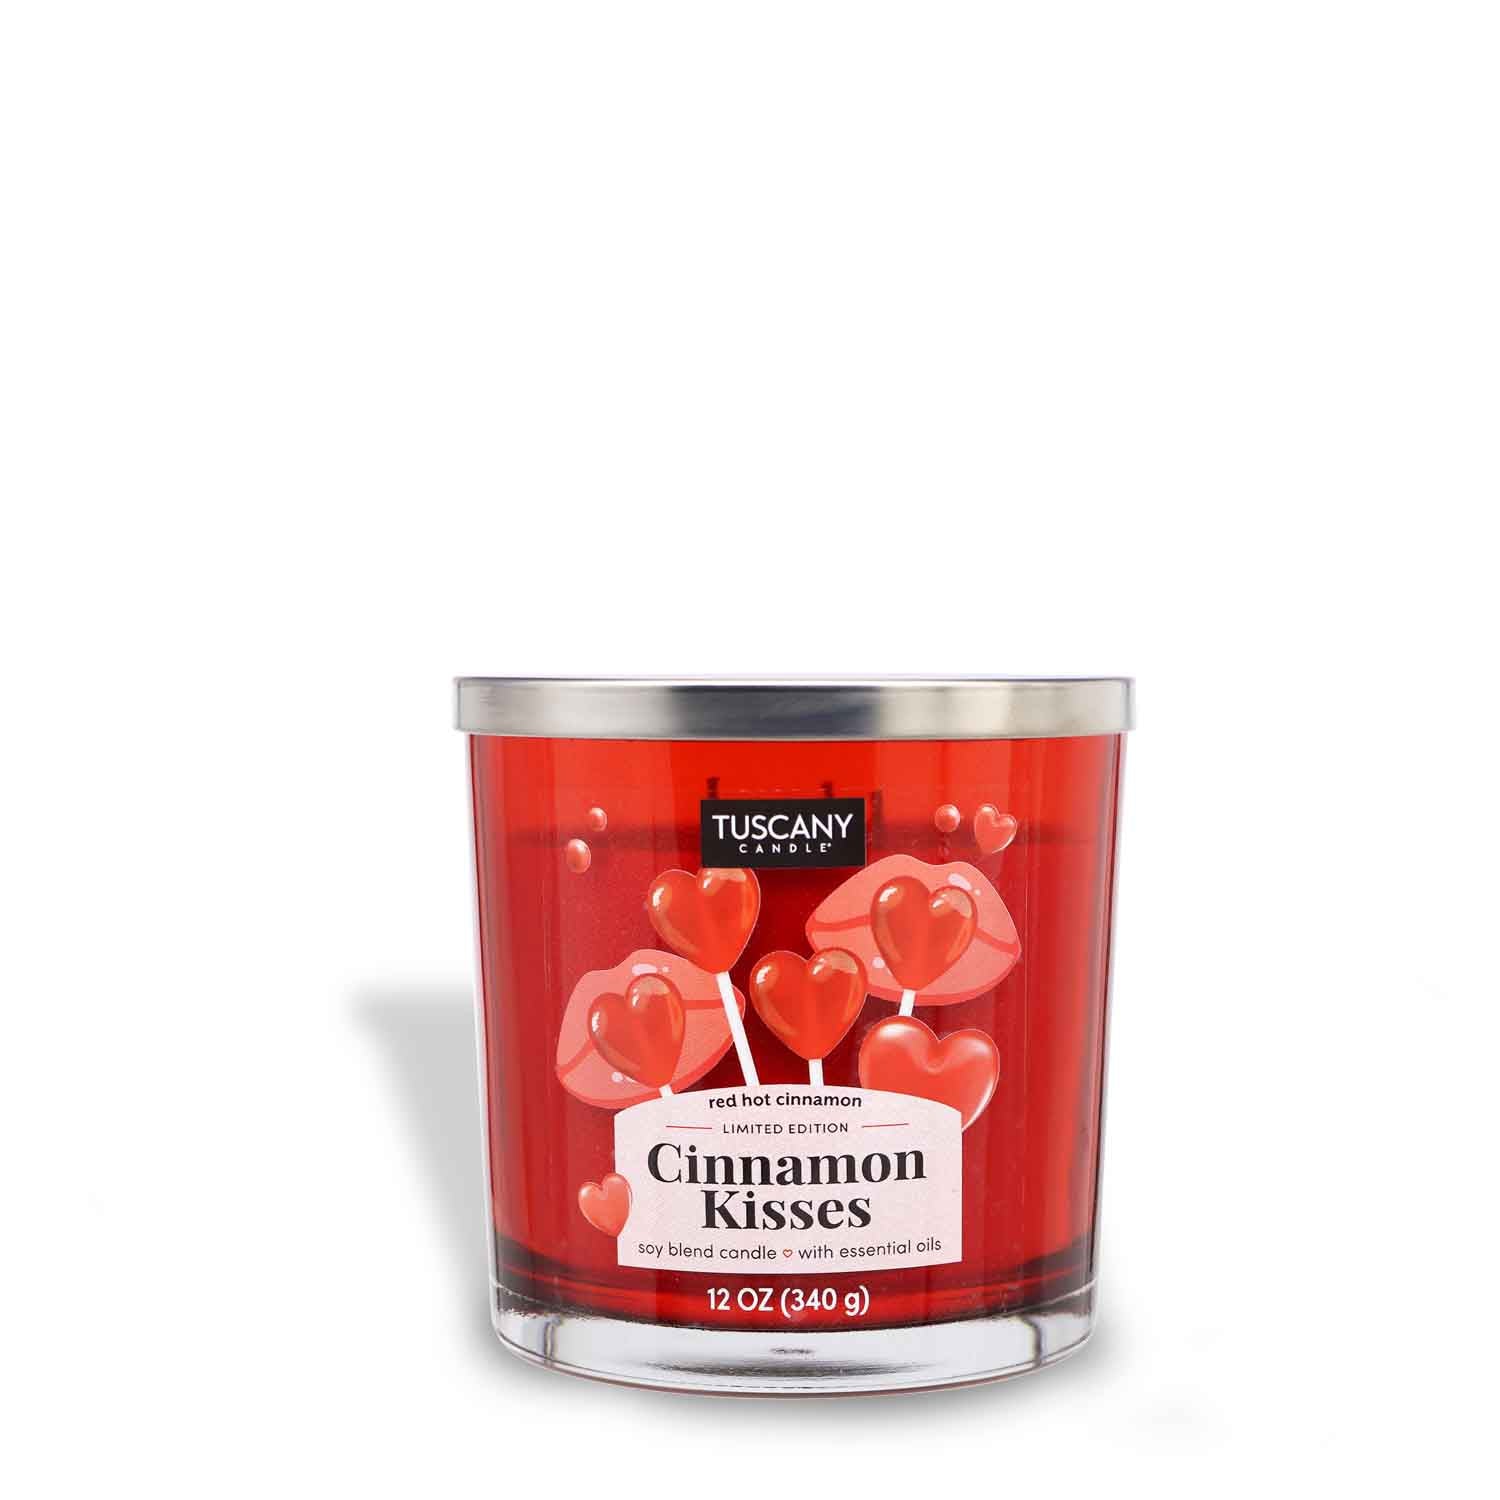 Tuscany Candle® SEASONAL Cinnamon Kisses Scented Jar Candle (12 oz) – Be Mine Collection.